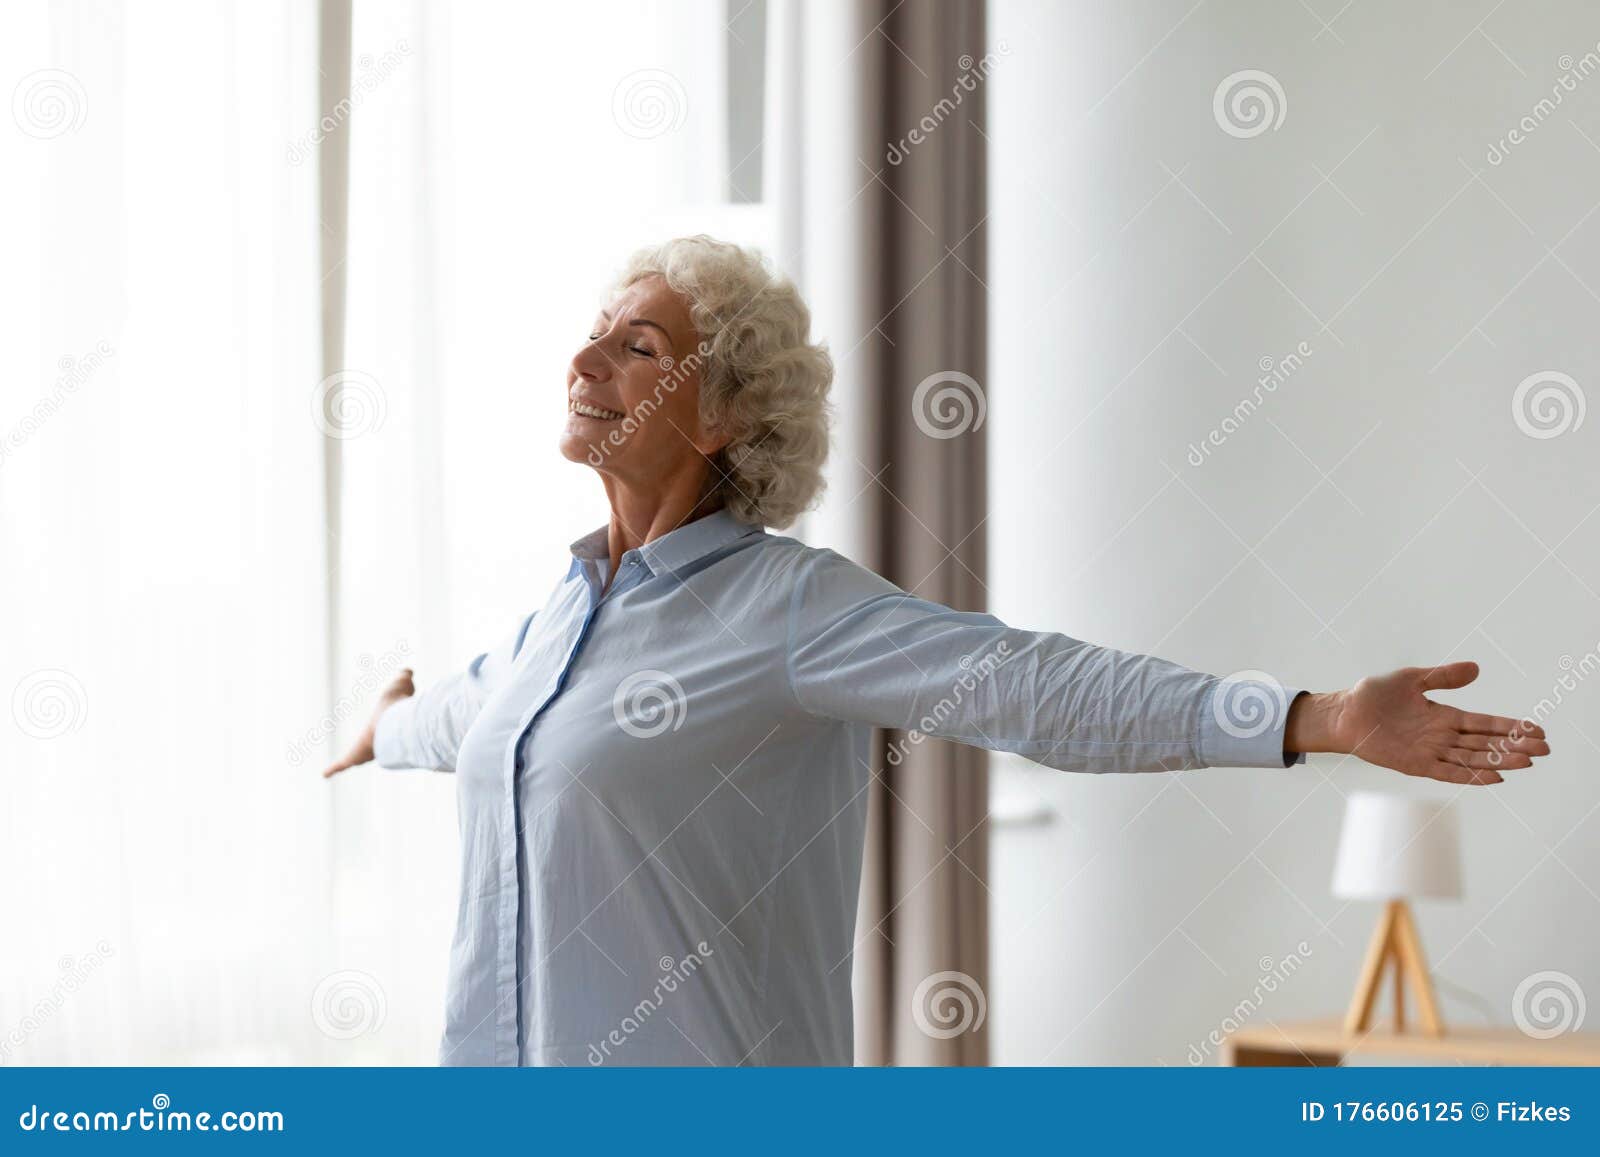 overjoyed old woman stretch at home feeling positive